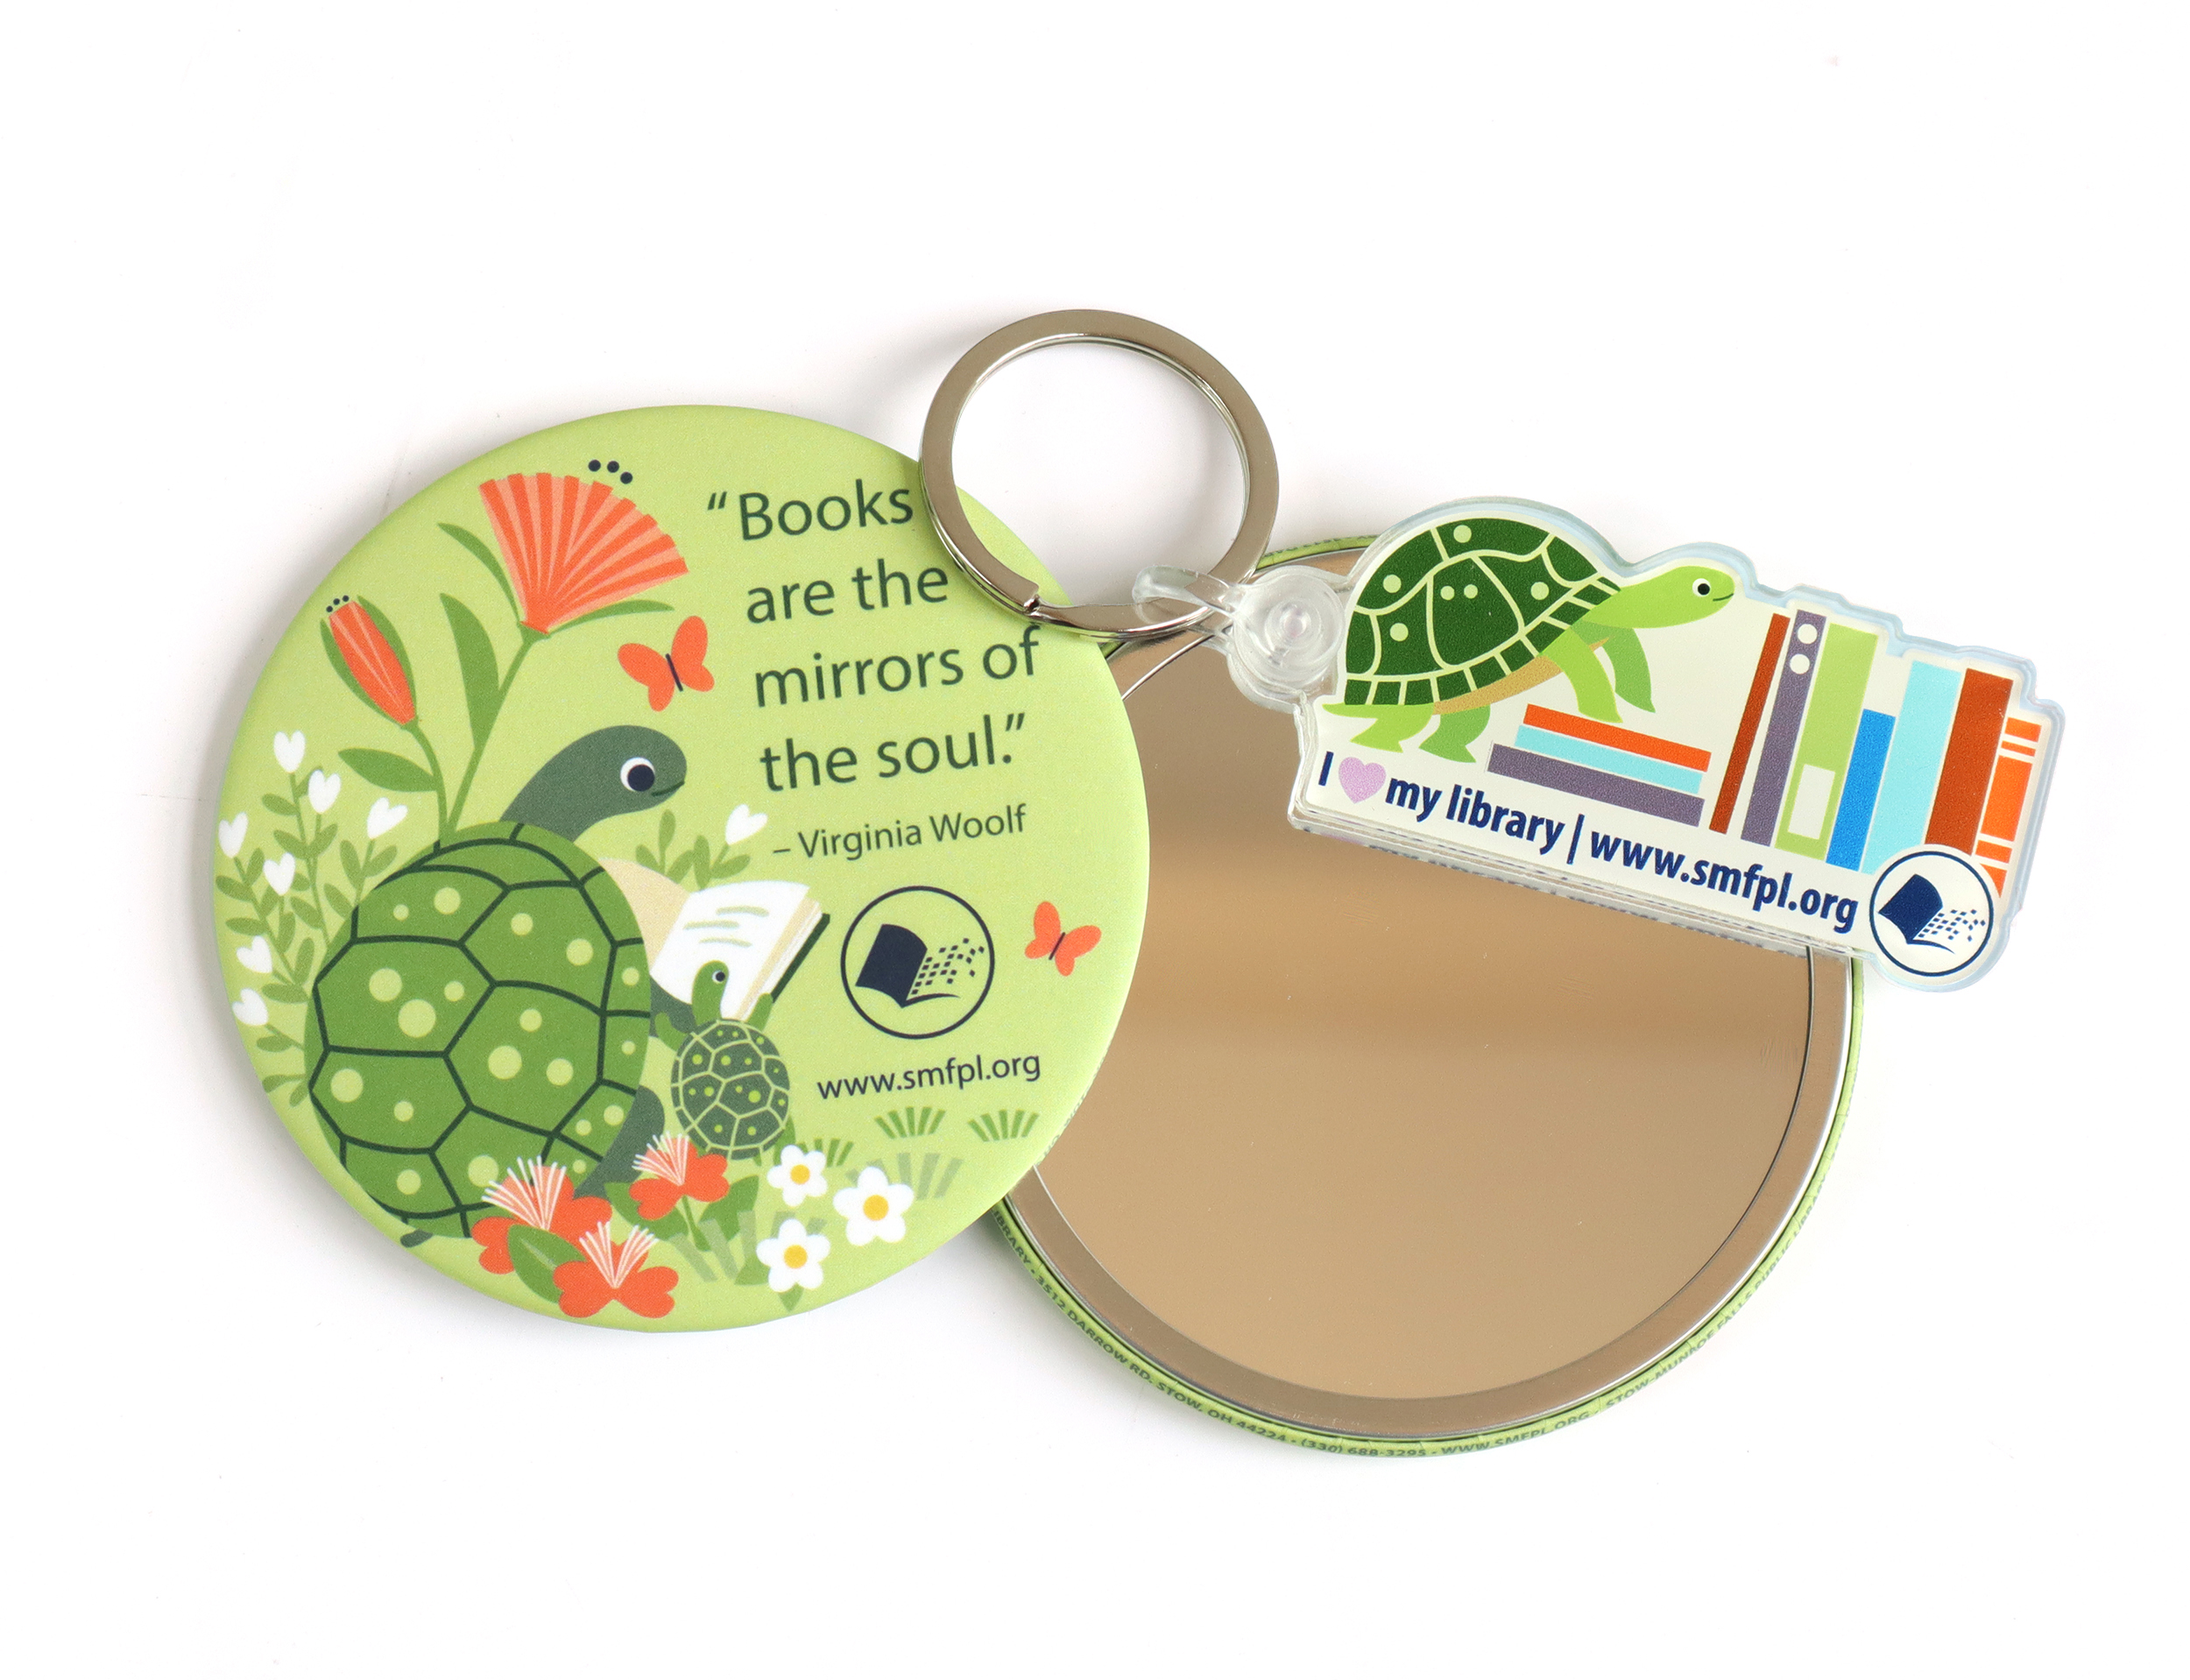 Acrylic keychain with an illustration of a smiling turtle climbing a stack of books. The text reads: I heart my library. www.smfpl.org, and a 3-inch pocket mirror illustrated with a larger turtle reading to a smaller one.